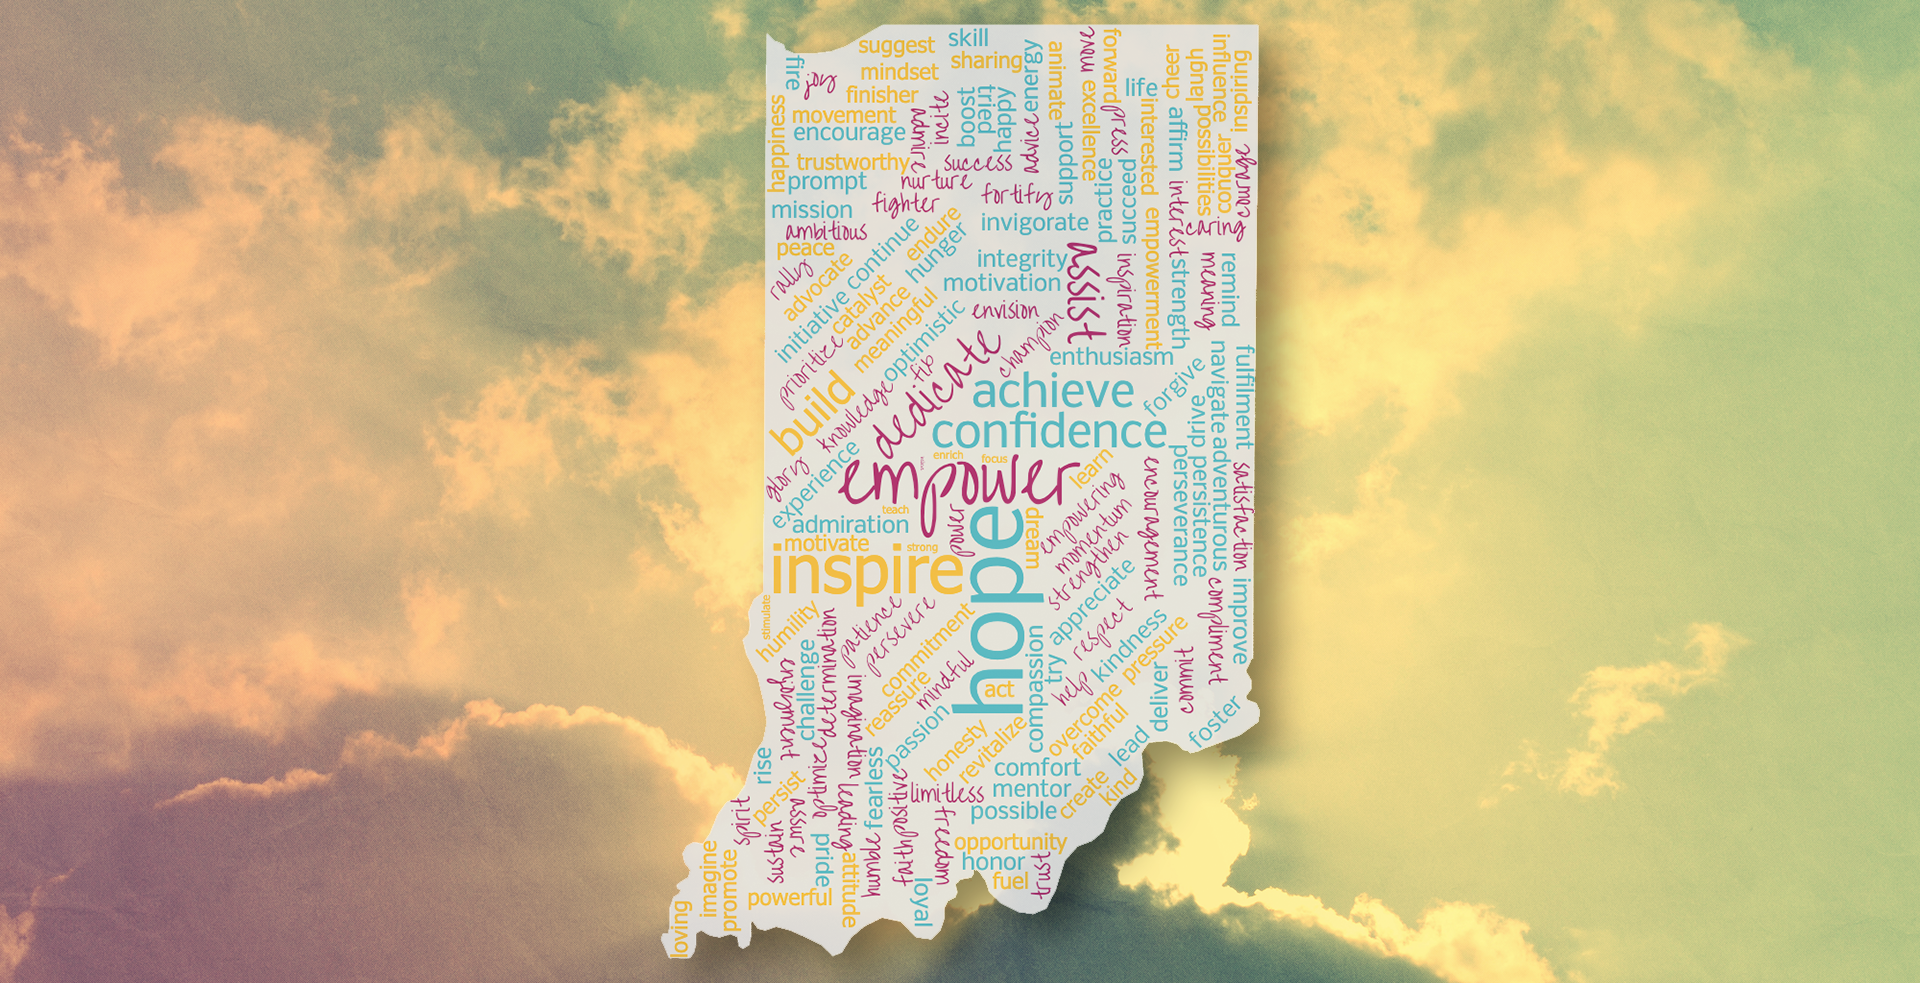 Recovery orgnization - Indiana Coalition Network